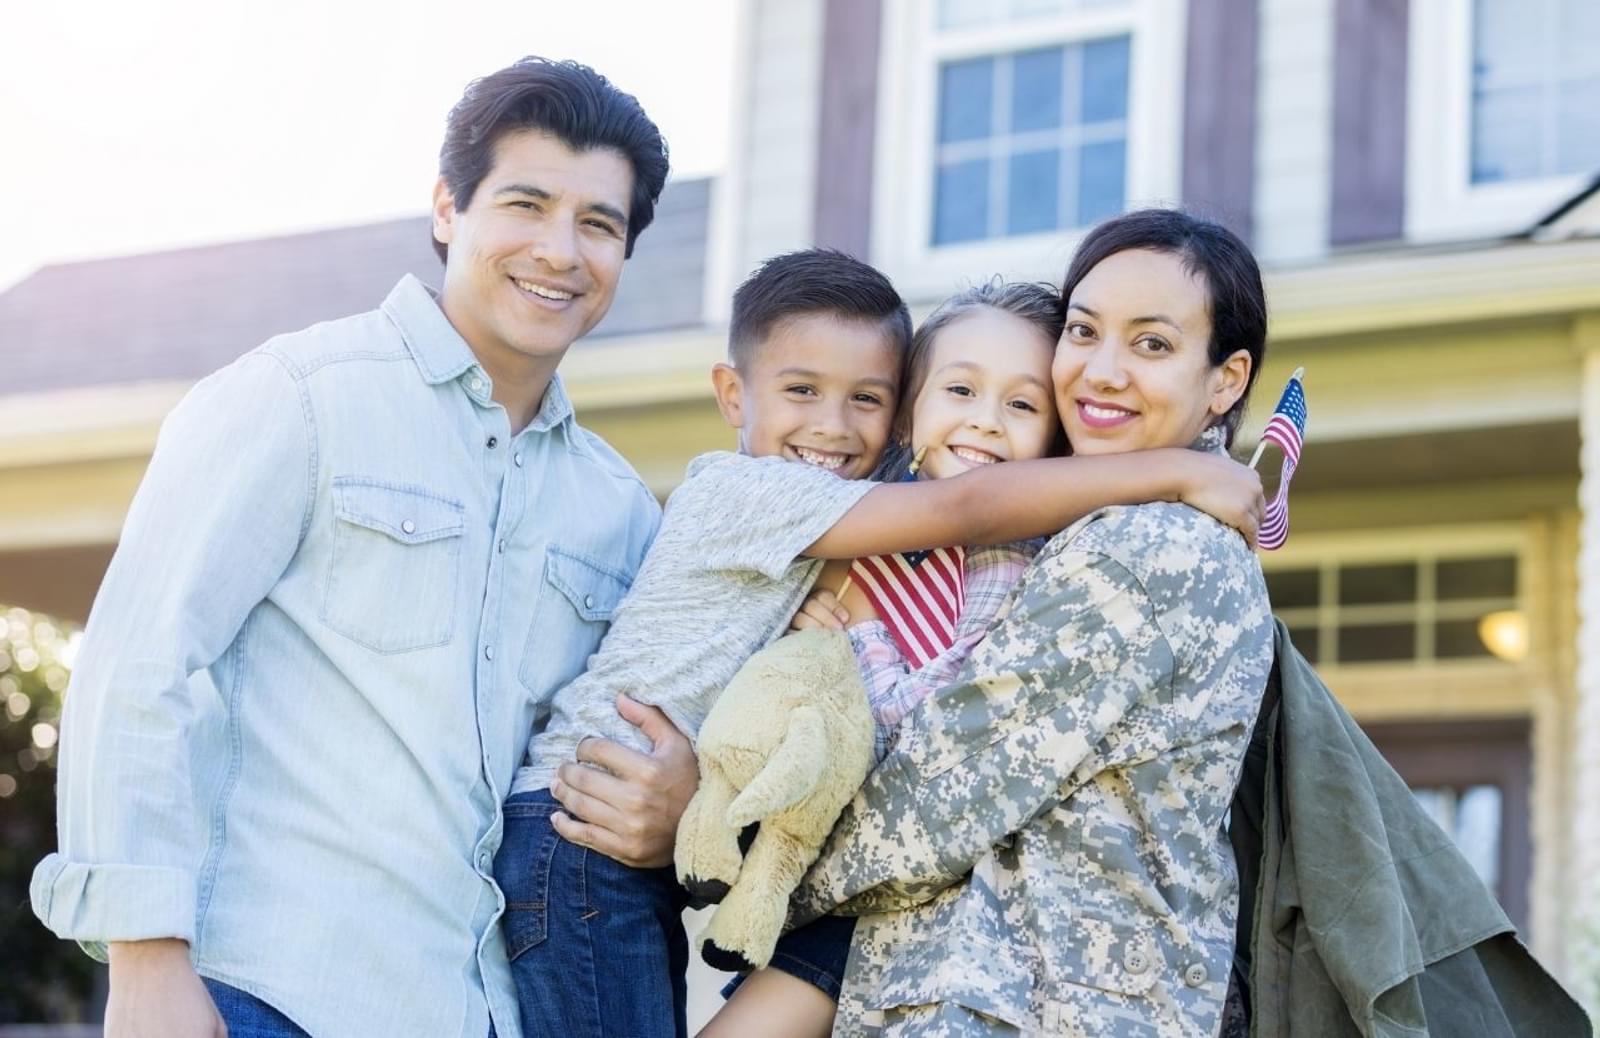 Military connected community resources